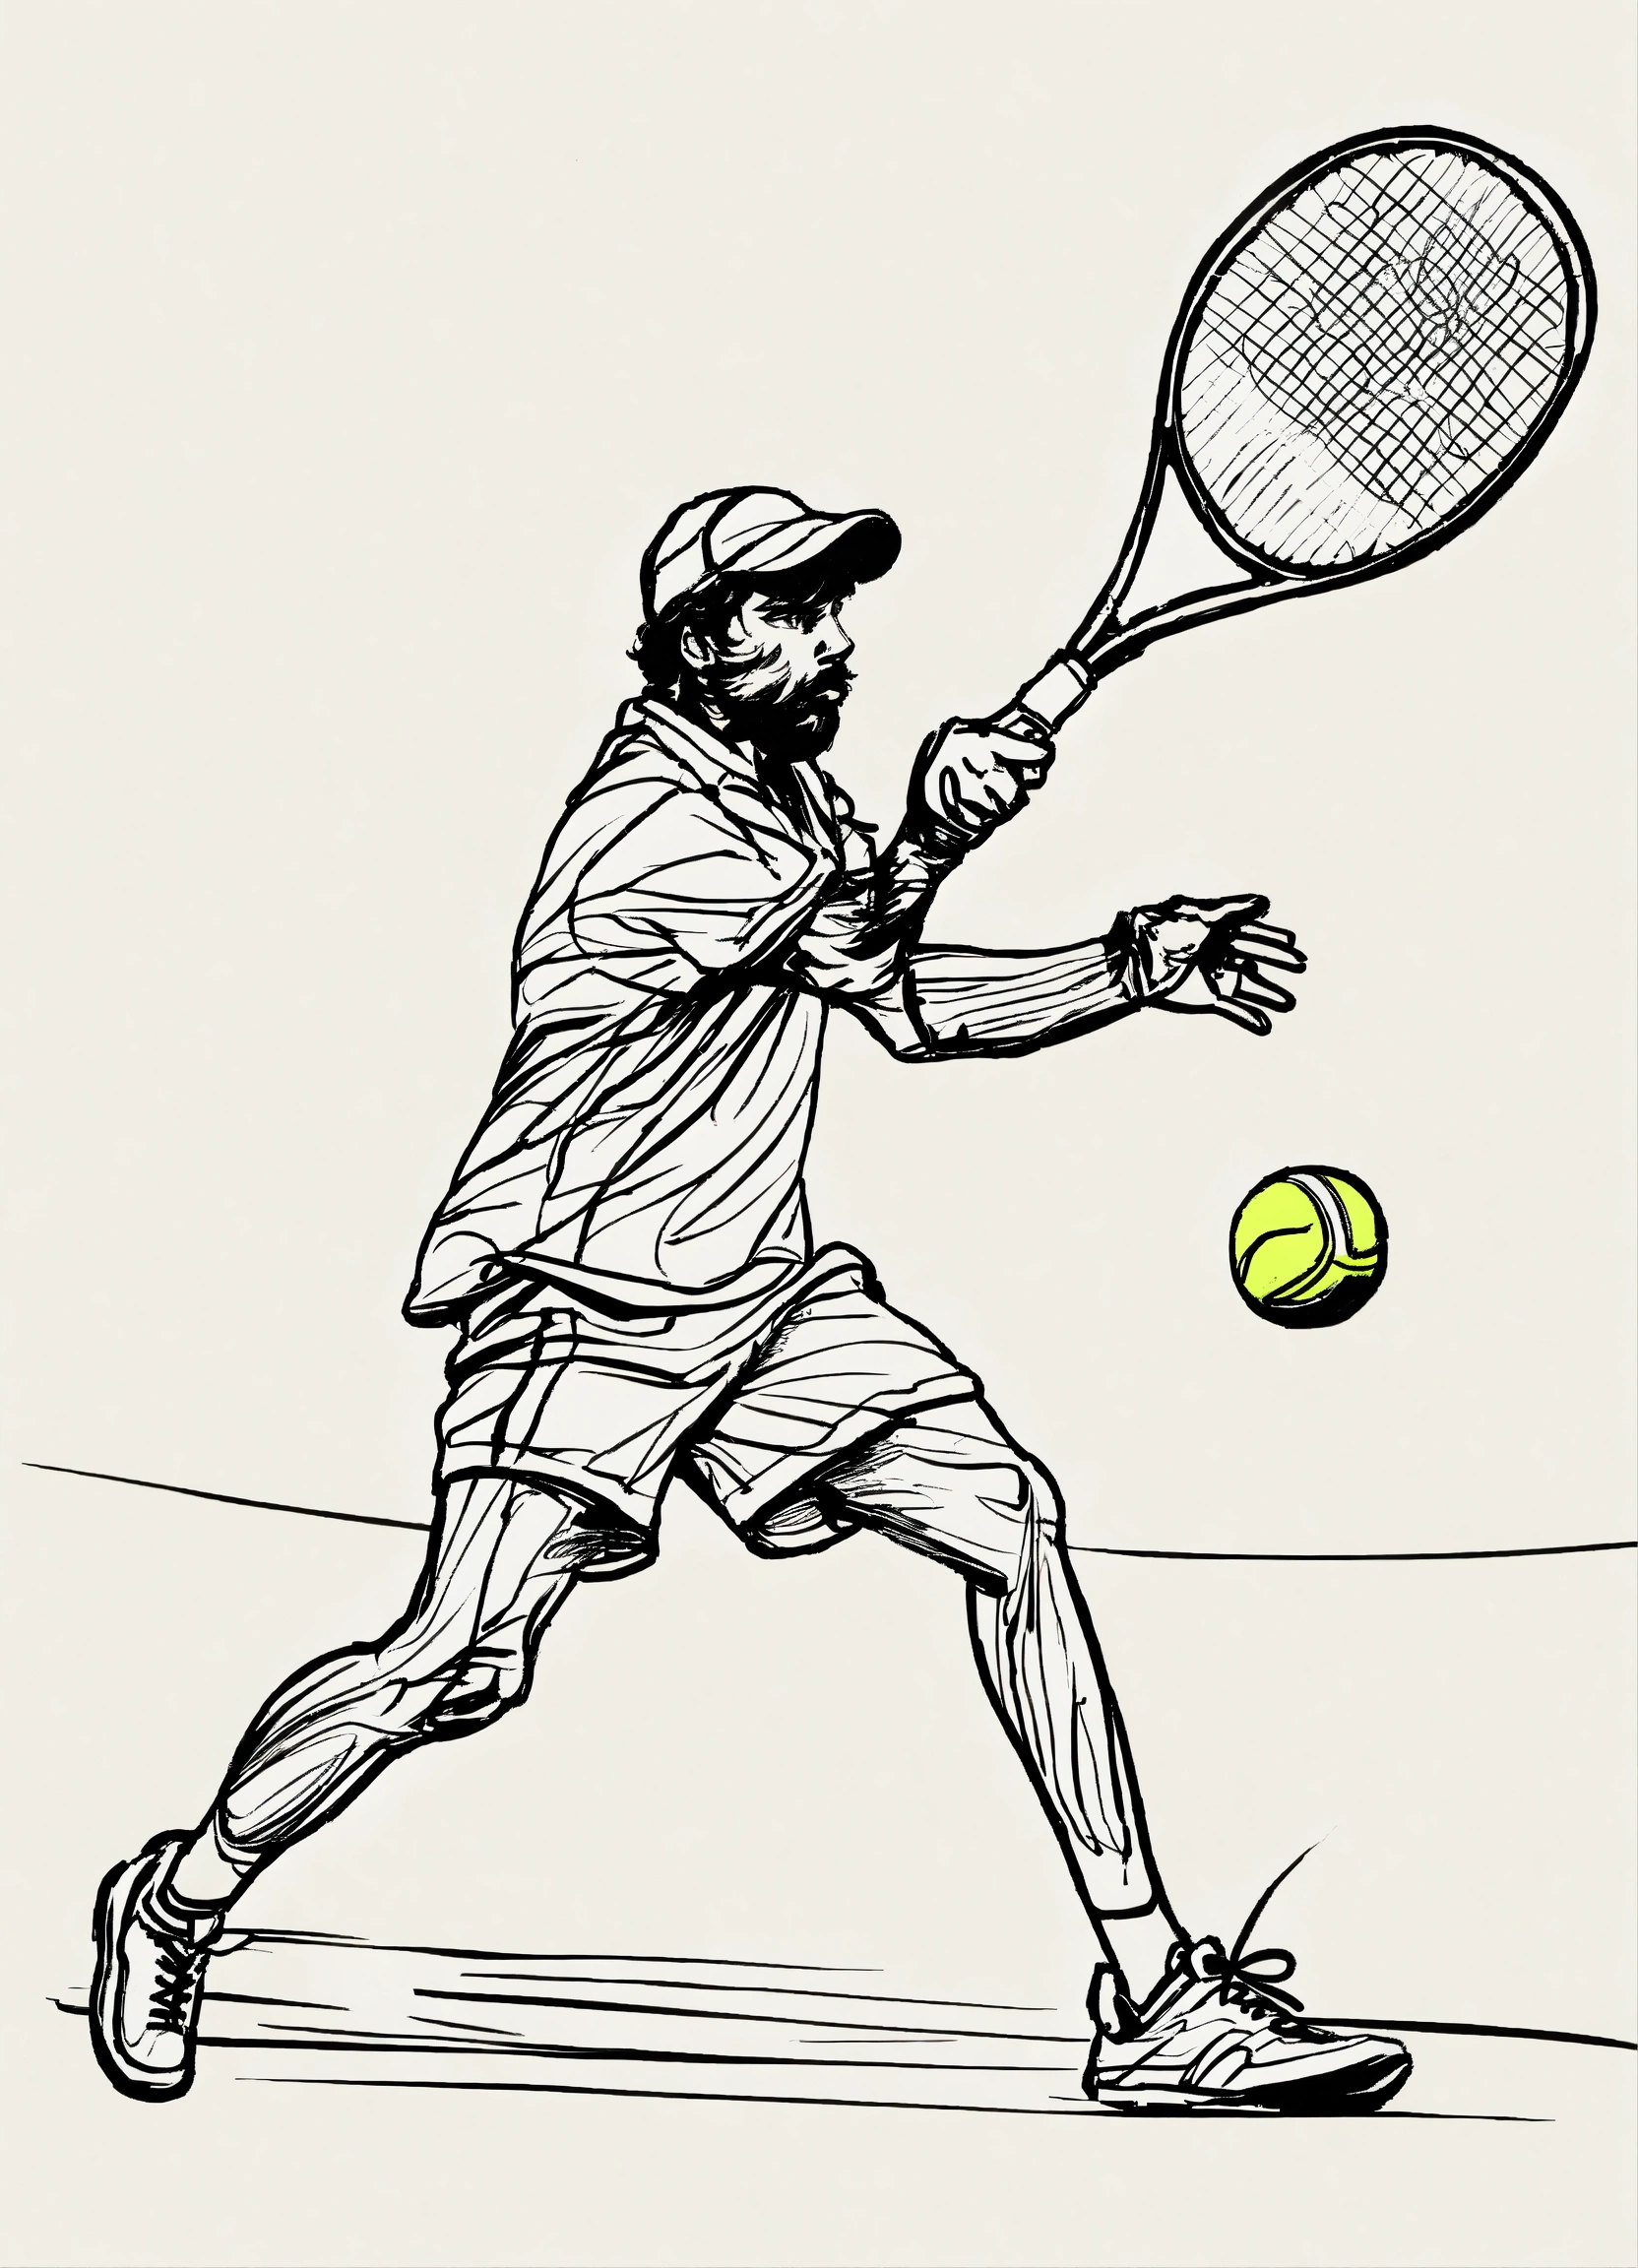 Lexica - Doodle tennisplayer at action, with white background